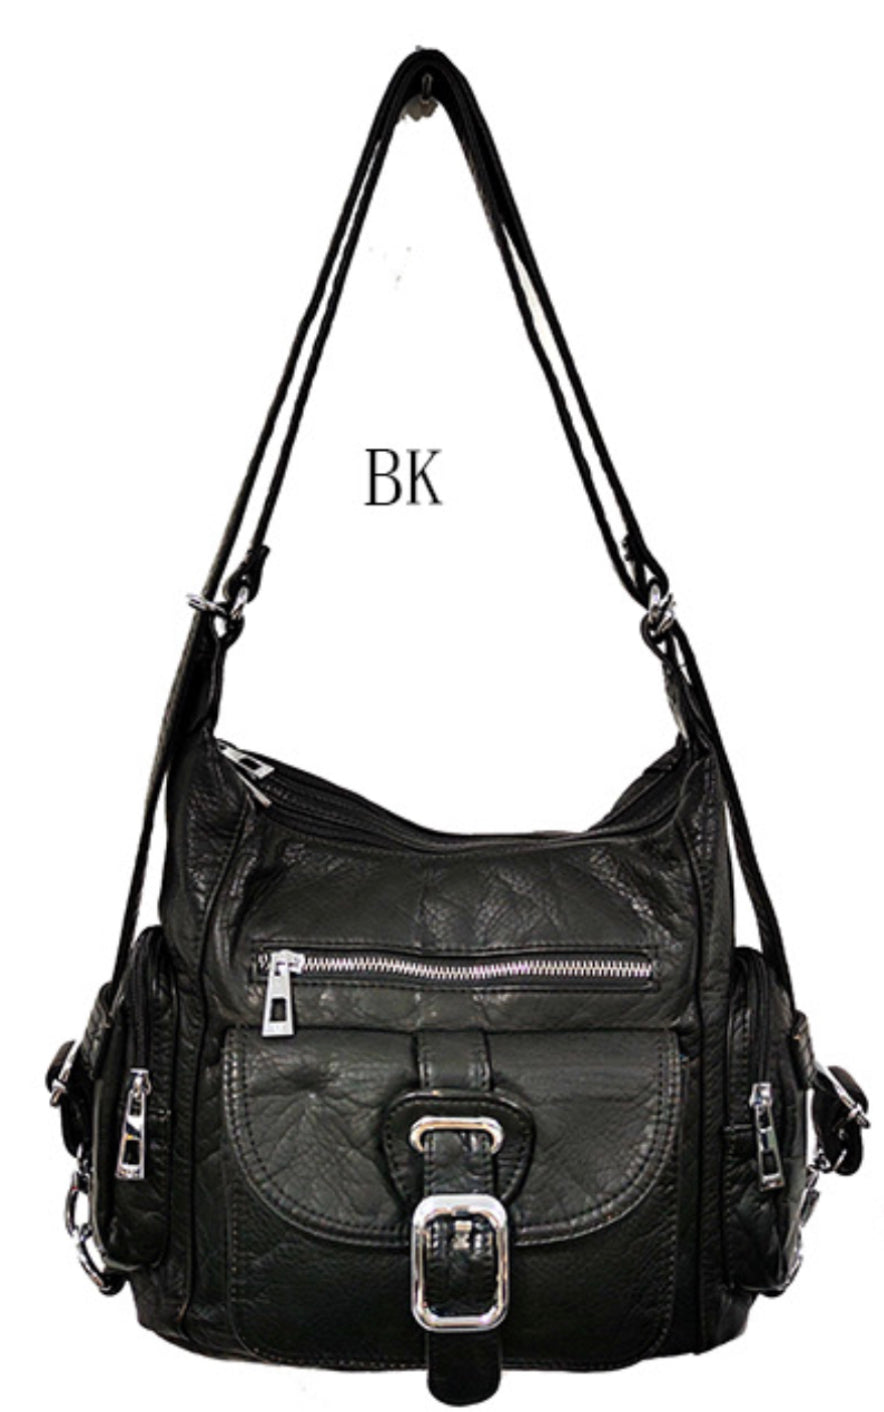 Small black 3 in 1 style backpack purse